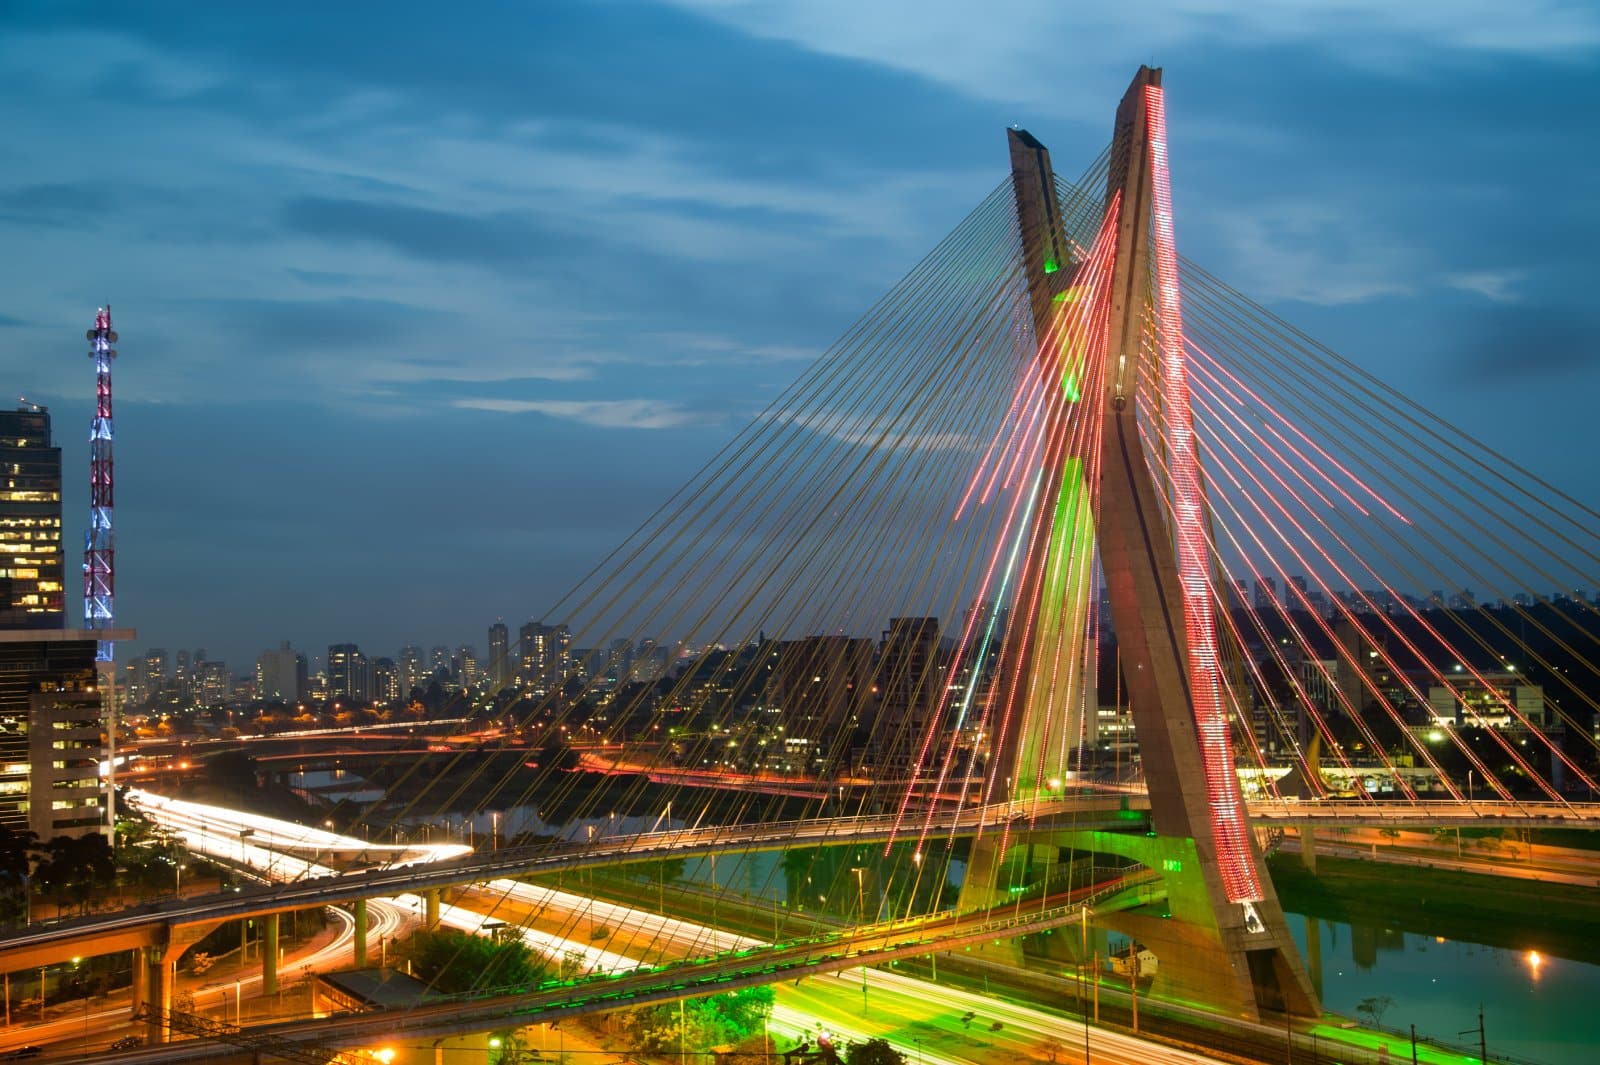 <p class="wp-caption-text">Image Credit: Shutterstock / Celso Diniz</p>  <p><span>São Paulo, the financial powerhouse of Brazil, is a city that pulsates with a vibrant cultural life. It boasts an impressive array of museums, such as the São Paulo Museum of Art (MASP), known for its remarkable collection of European and Brazilian works. The city’s culinary scene is a gastronomic adventure, reflecting the diversity of its population with a wide range of international and Brazilian cuisines.</span></p> <p><span>São Paulo’s nightlife is equally dynamic, with many bars, clubs, and live music venues catering to all tastes. The city’s architecture combines the old and the new, with modern skyscrapers alongside historic buildings.</span></p> <p><span>For a taste of São Paulo’s bohemian side, visiting the neighborhood of Vila Madalena is essential, with its street art, eclectic shops, and cozy cafes. São Paulo’s sheer size can be overwhelming, but its cultural richness and the warmth of its people make it an unforgettable destination.</span></p> <p><b>Insider’s Tip:</b><span> Explore the Vila Madalena neighborhood for its vibrant street art and bustling nightlife.</span></p> <p><b>When to Travel:</b><span> May to September offers cooler temperatures and less rain.</span></p> <p><b>How to Get There:</b><span> São Paulo–Guarulhos International Airport is the main entry point. The city’s metro and bus lines cover extensive areas.</span></p>